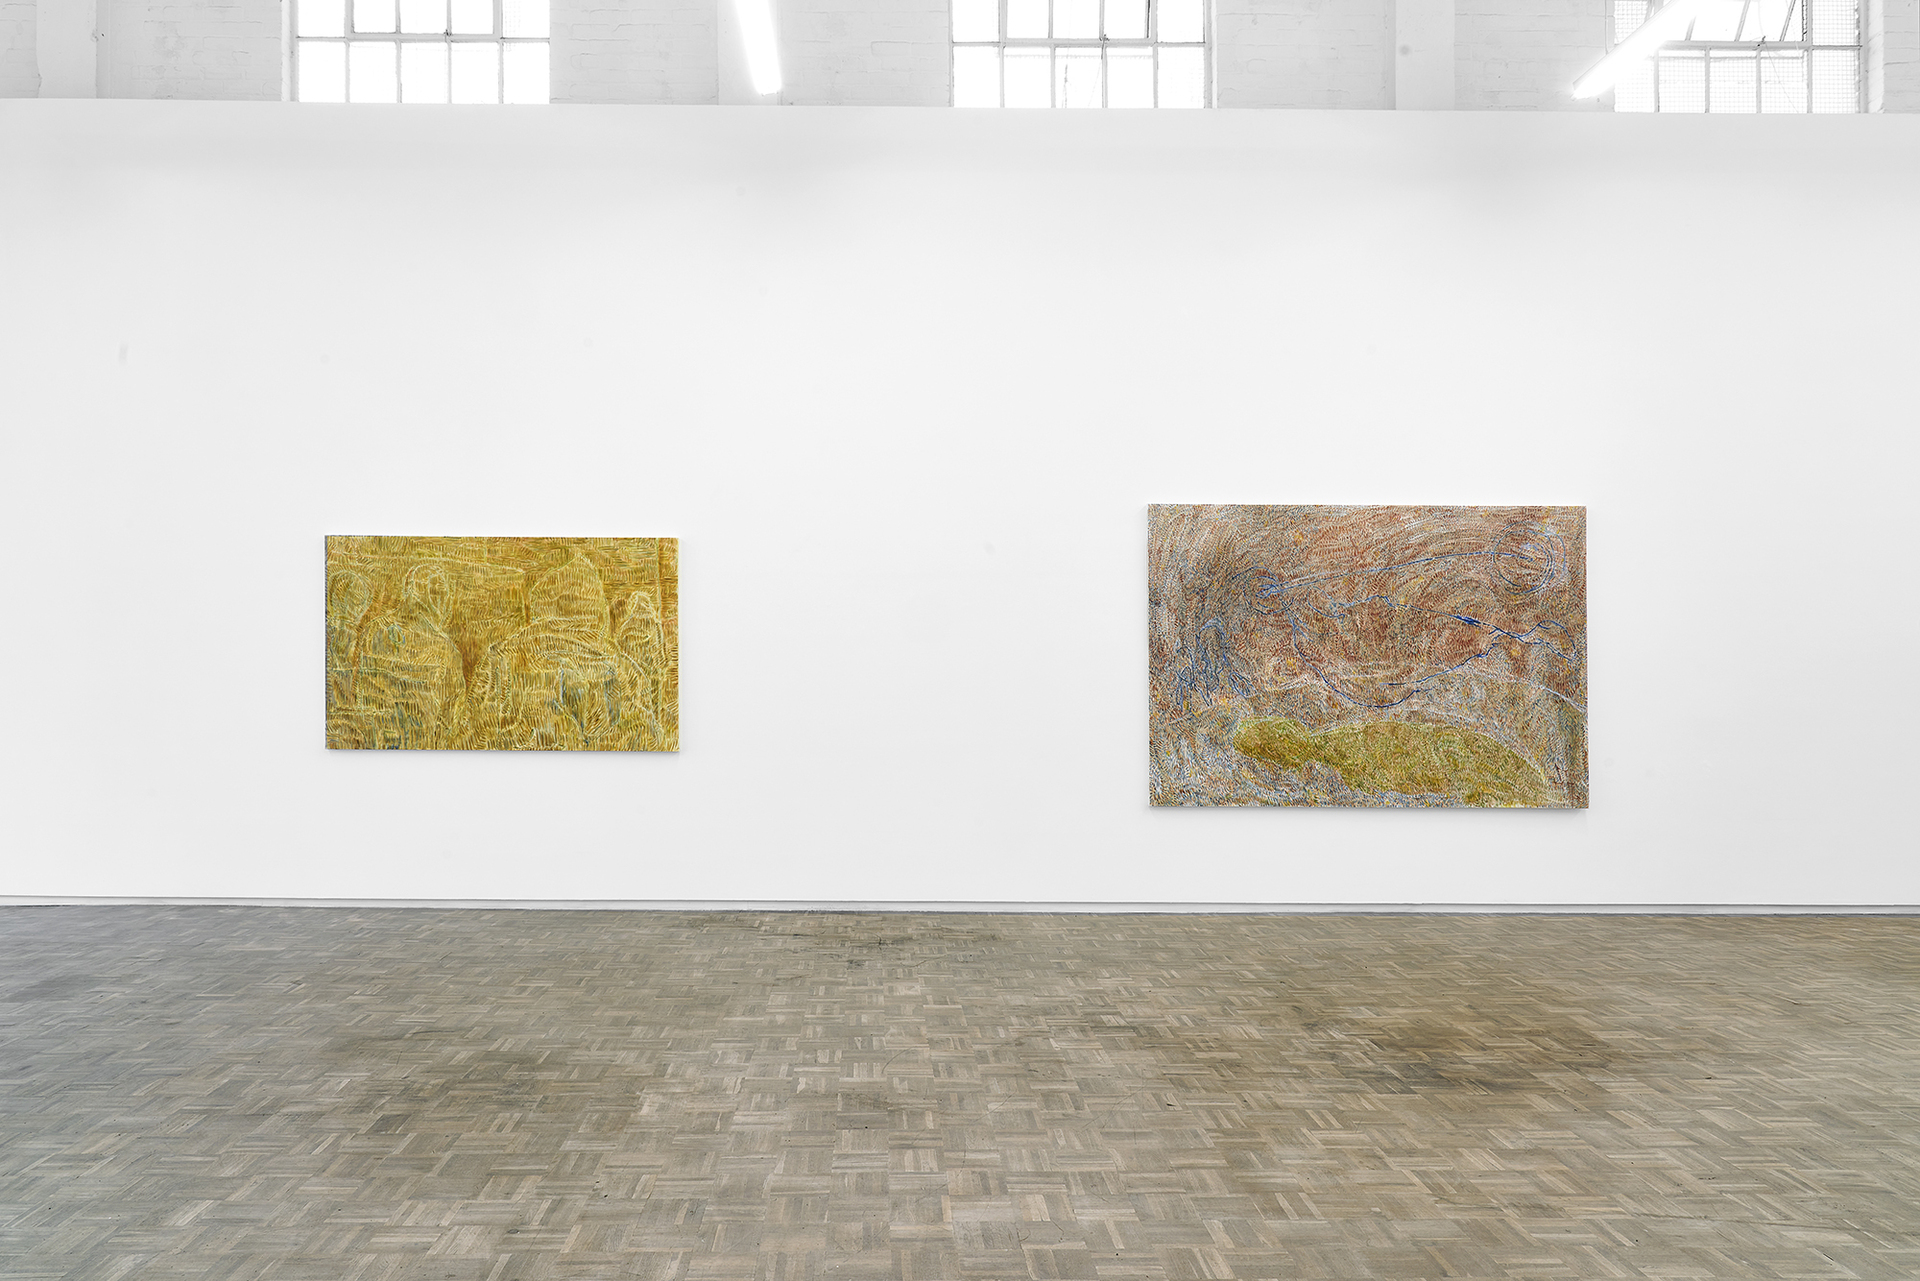 Achraf Touloub, 'Vies paralleles', 2022 | Installation view at blank projects, Cape Town (7)